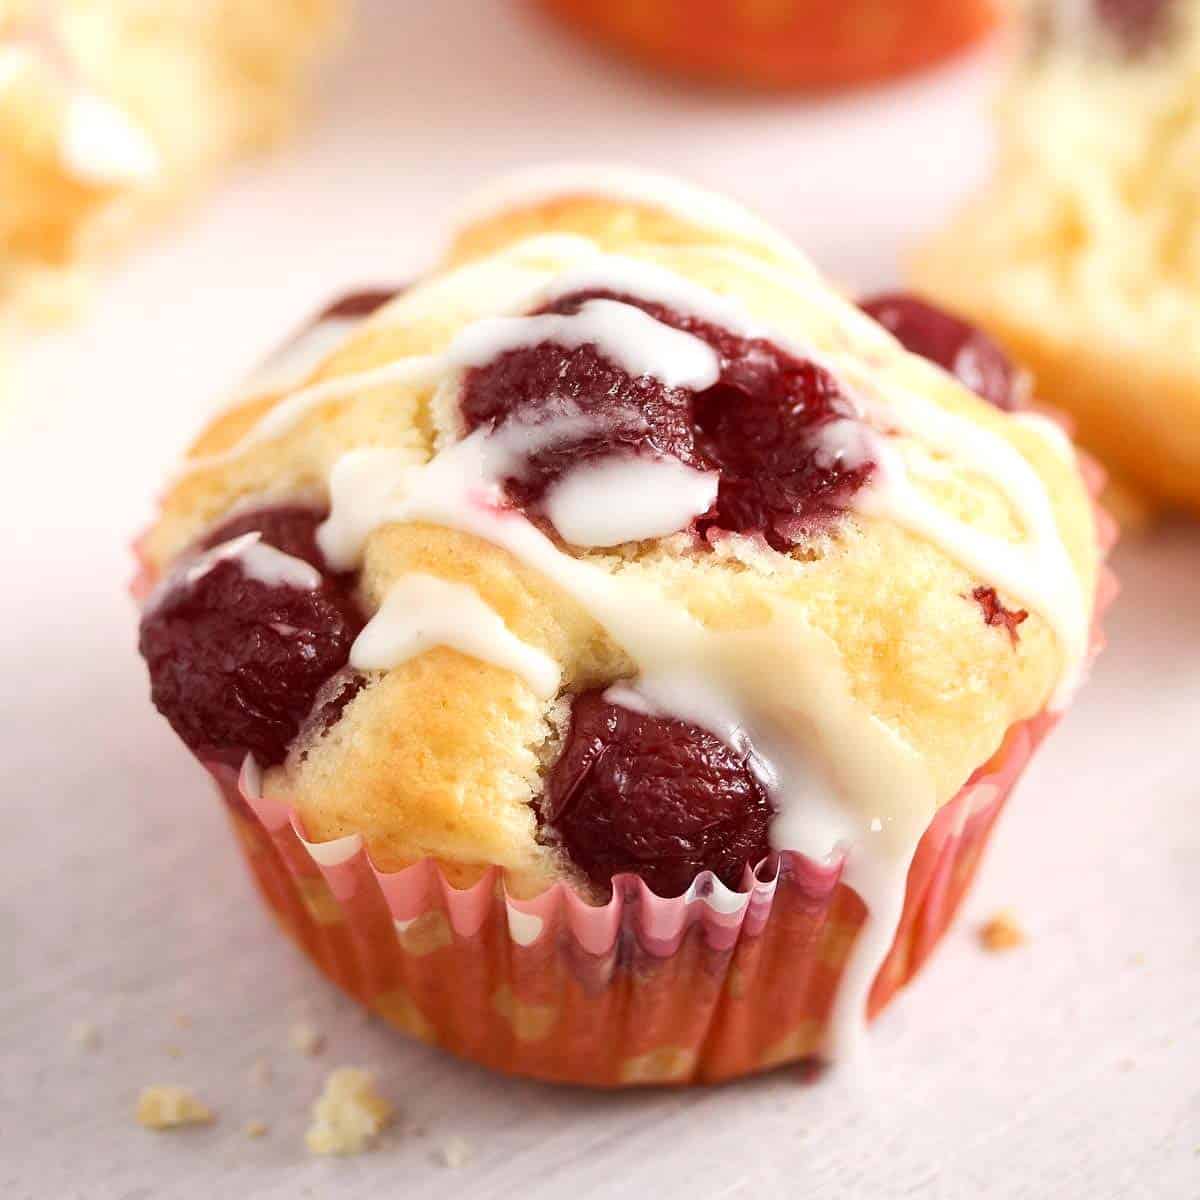 One quark muffin topped with cherries and drizzled with icing.